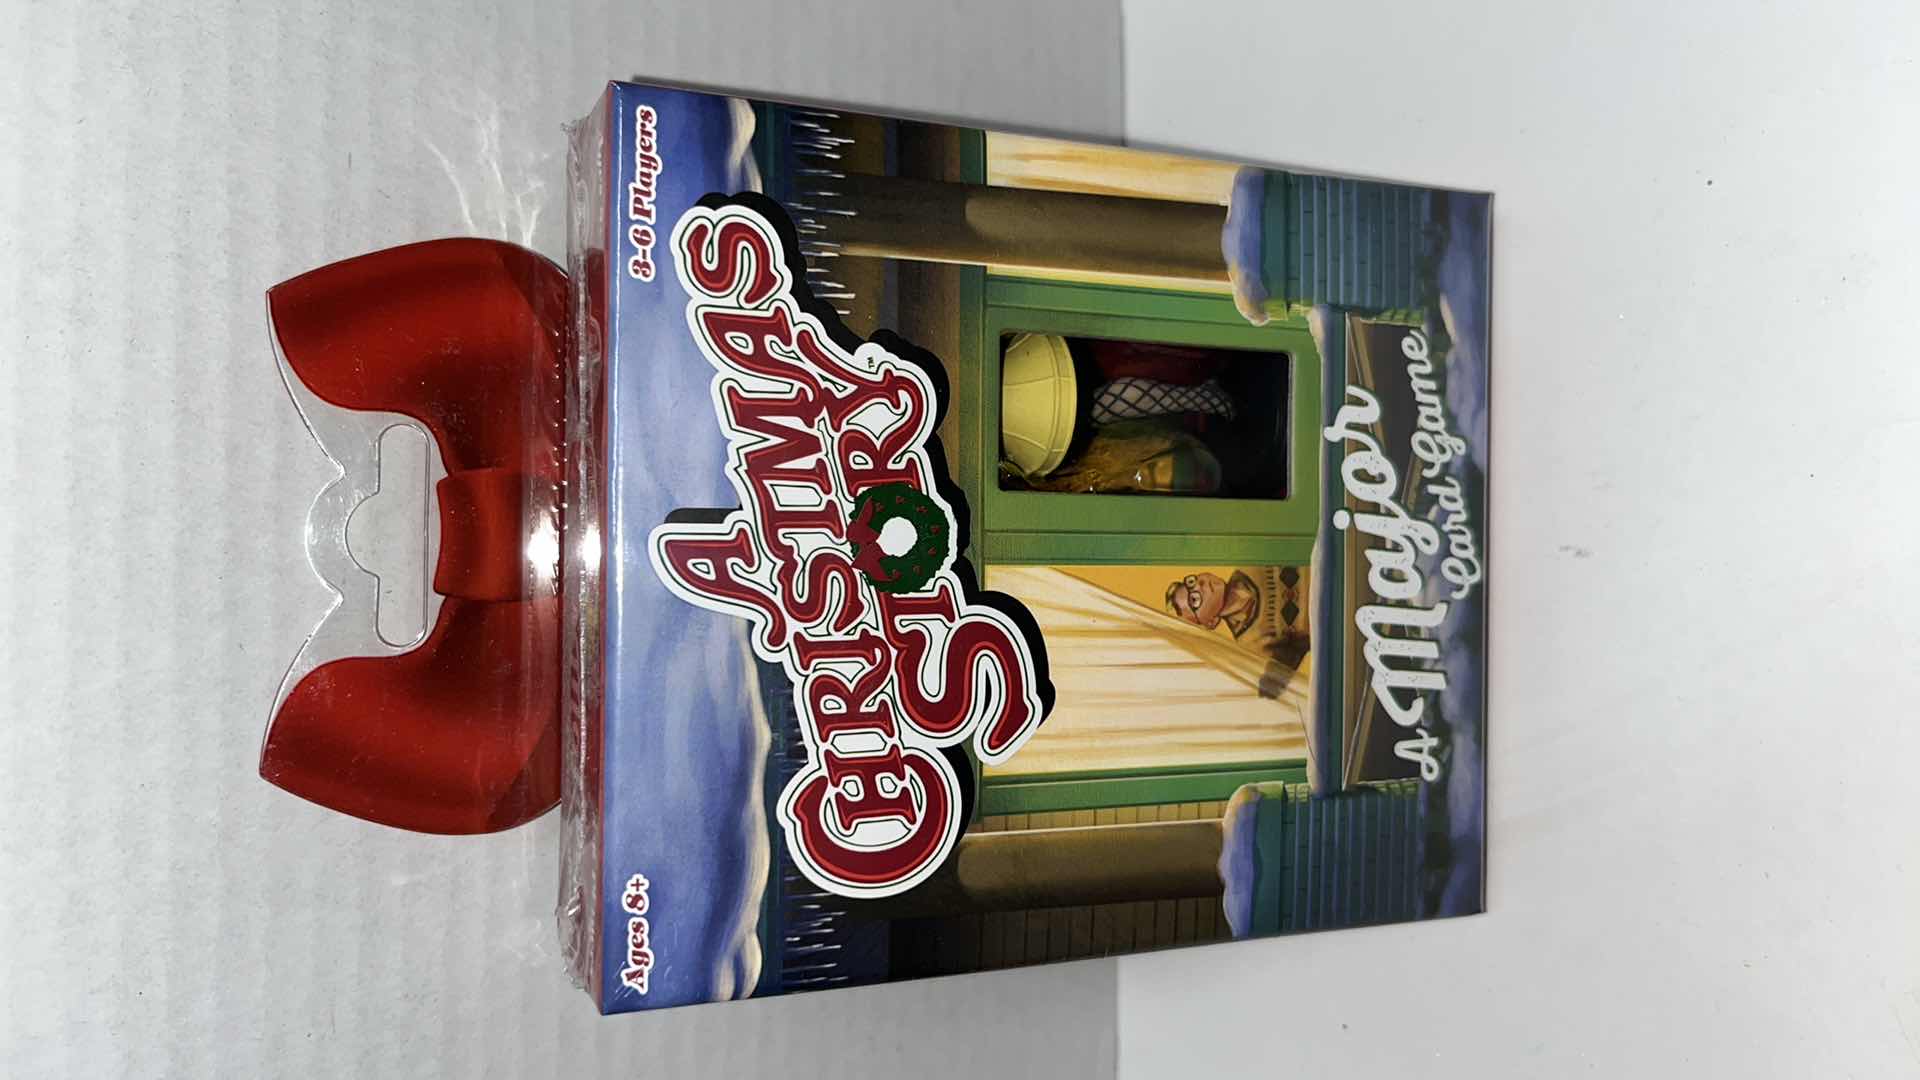 Photo 2 of BRAND NEW FUNKO GAMES A CHRISTMAS STORY “A MAJOR CARD GAME” & NECA A CHRISTMAS STORY LEG LAMP TALKING KEYCHAIN (2)